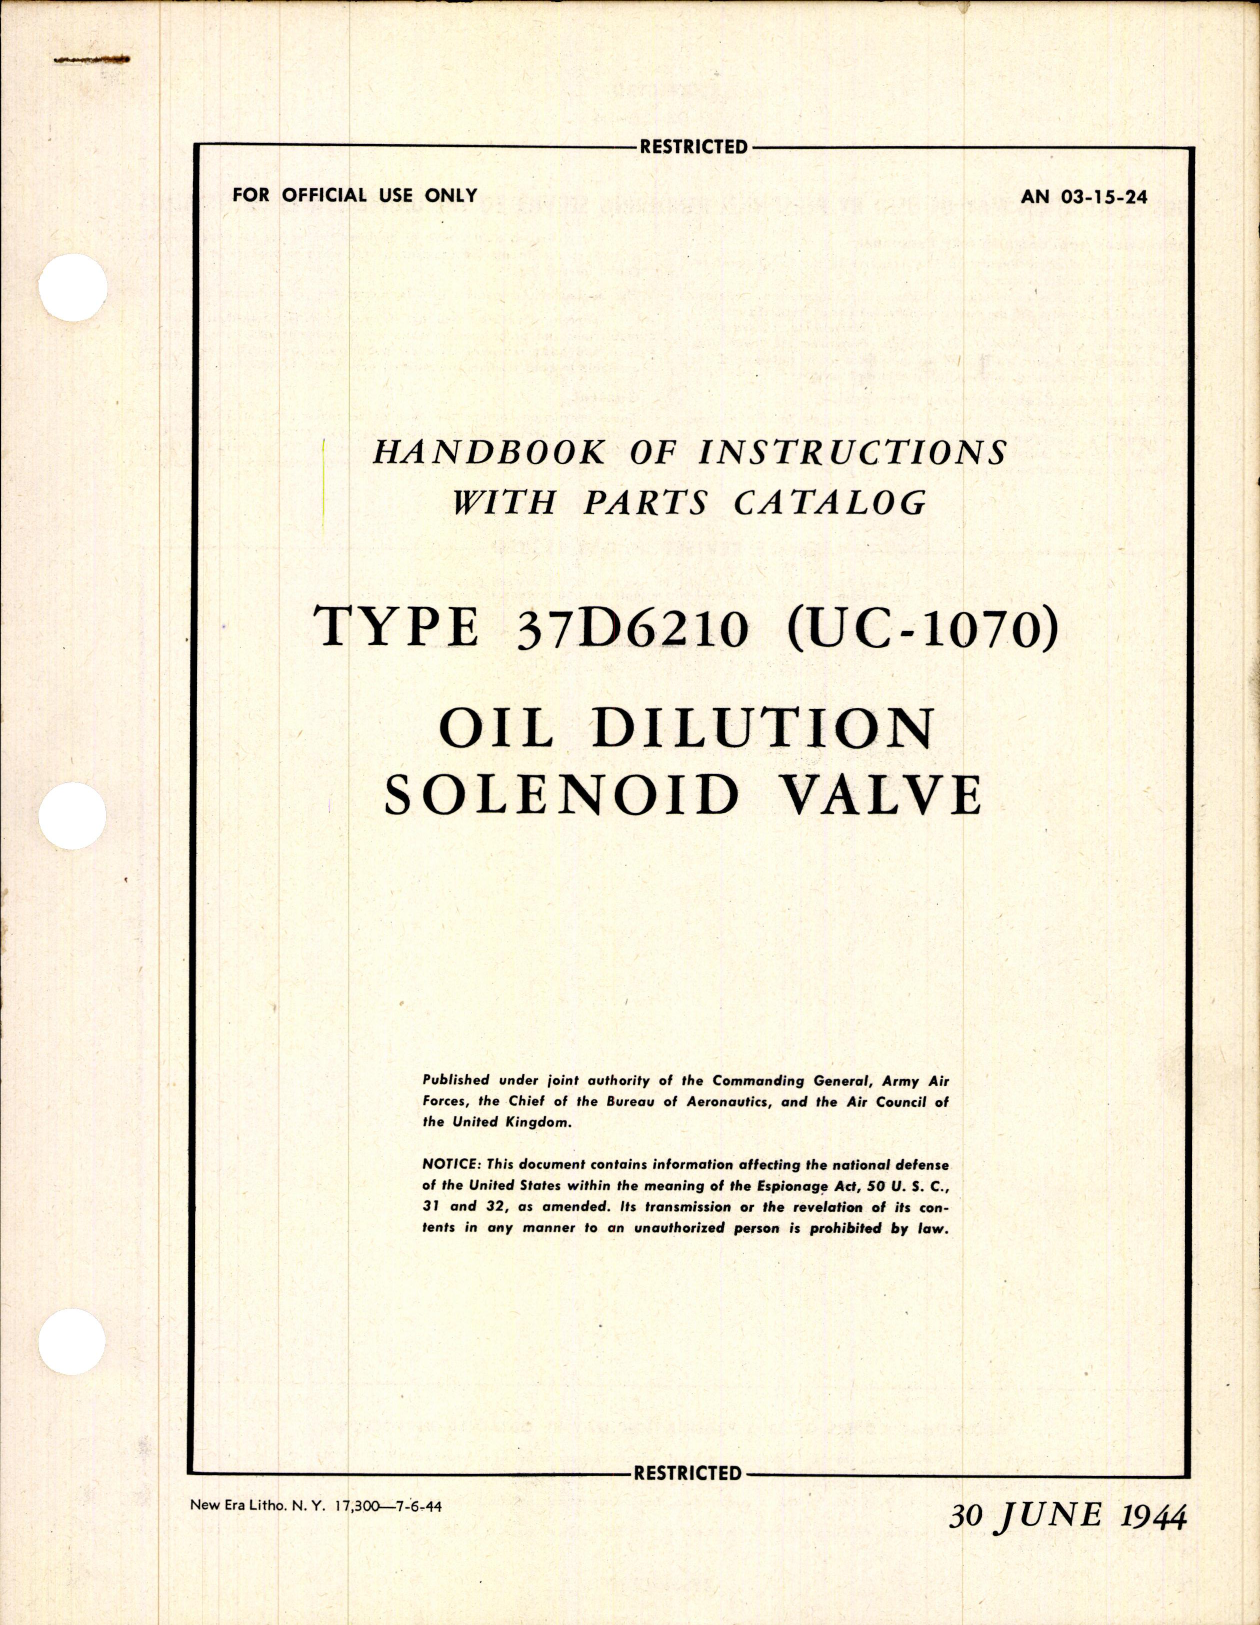 Sample page 1 from AirCorps Library document: Parts Catalog for Oil Dilution Solenoid Valve